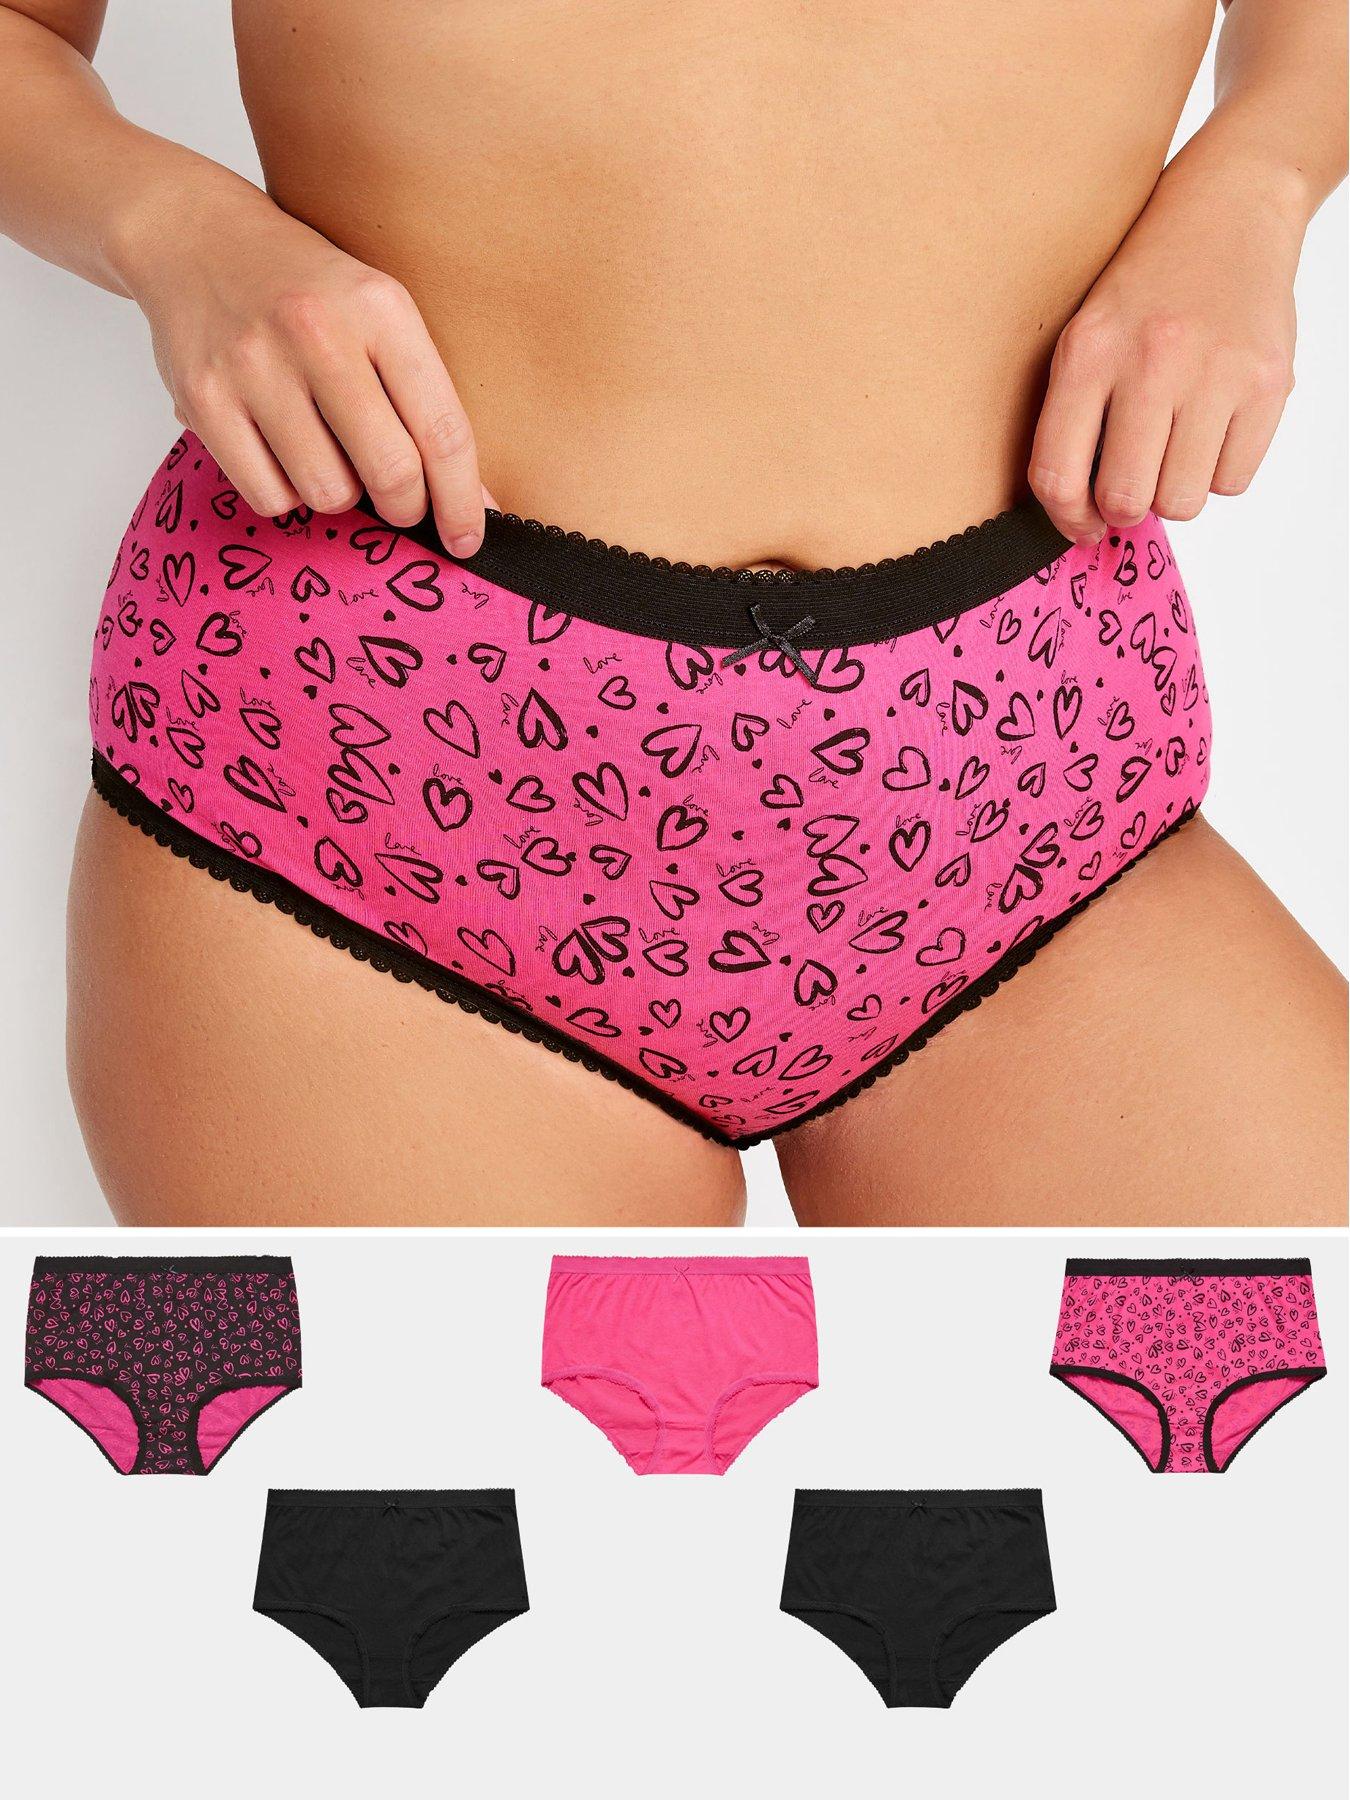  Women's High Waist Knickers Cotton Briefs Underwear Ladies Full  Back Coverage Bondage Sports Panties Plus Size Underpants,Apr : Clothing,  Shoes & Jewelry